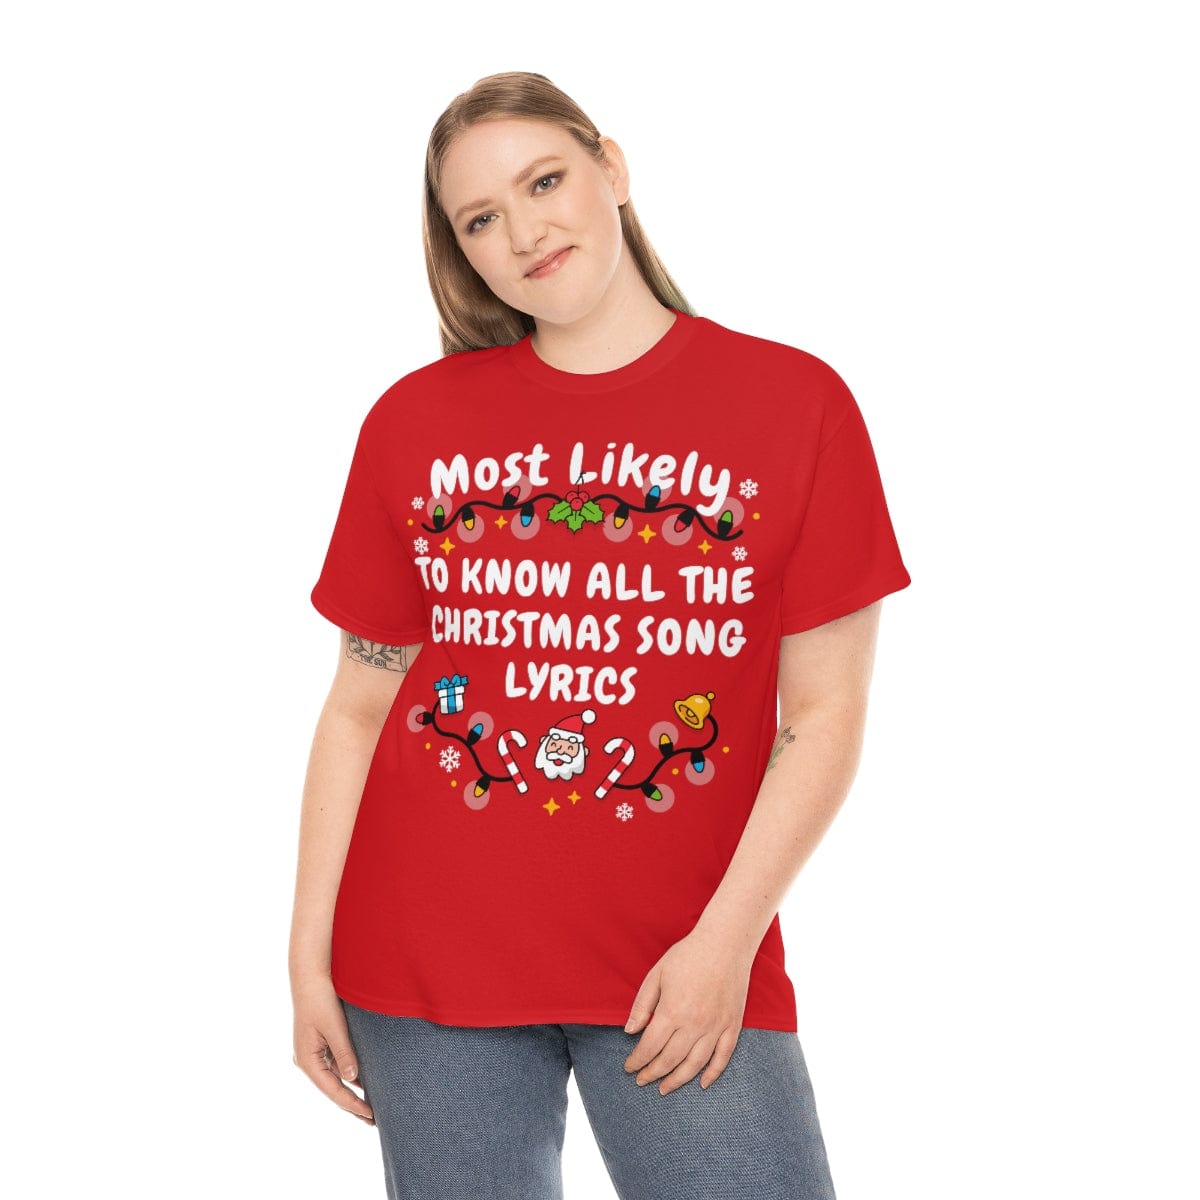 TO KNOW ALL THE CHRISTMAS SONG LYRICS